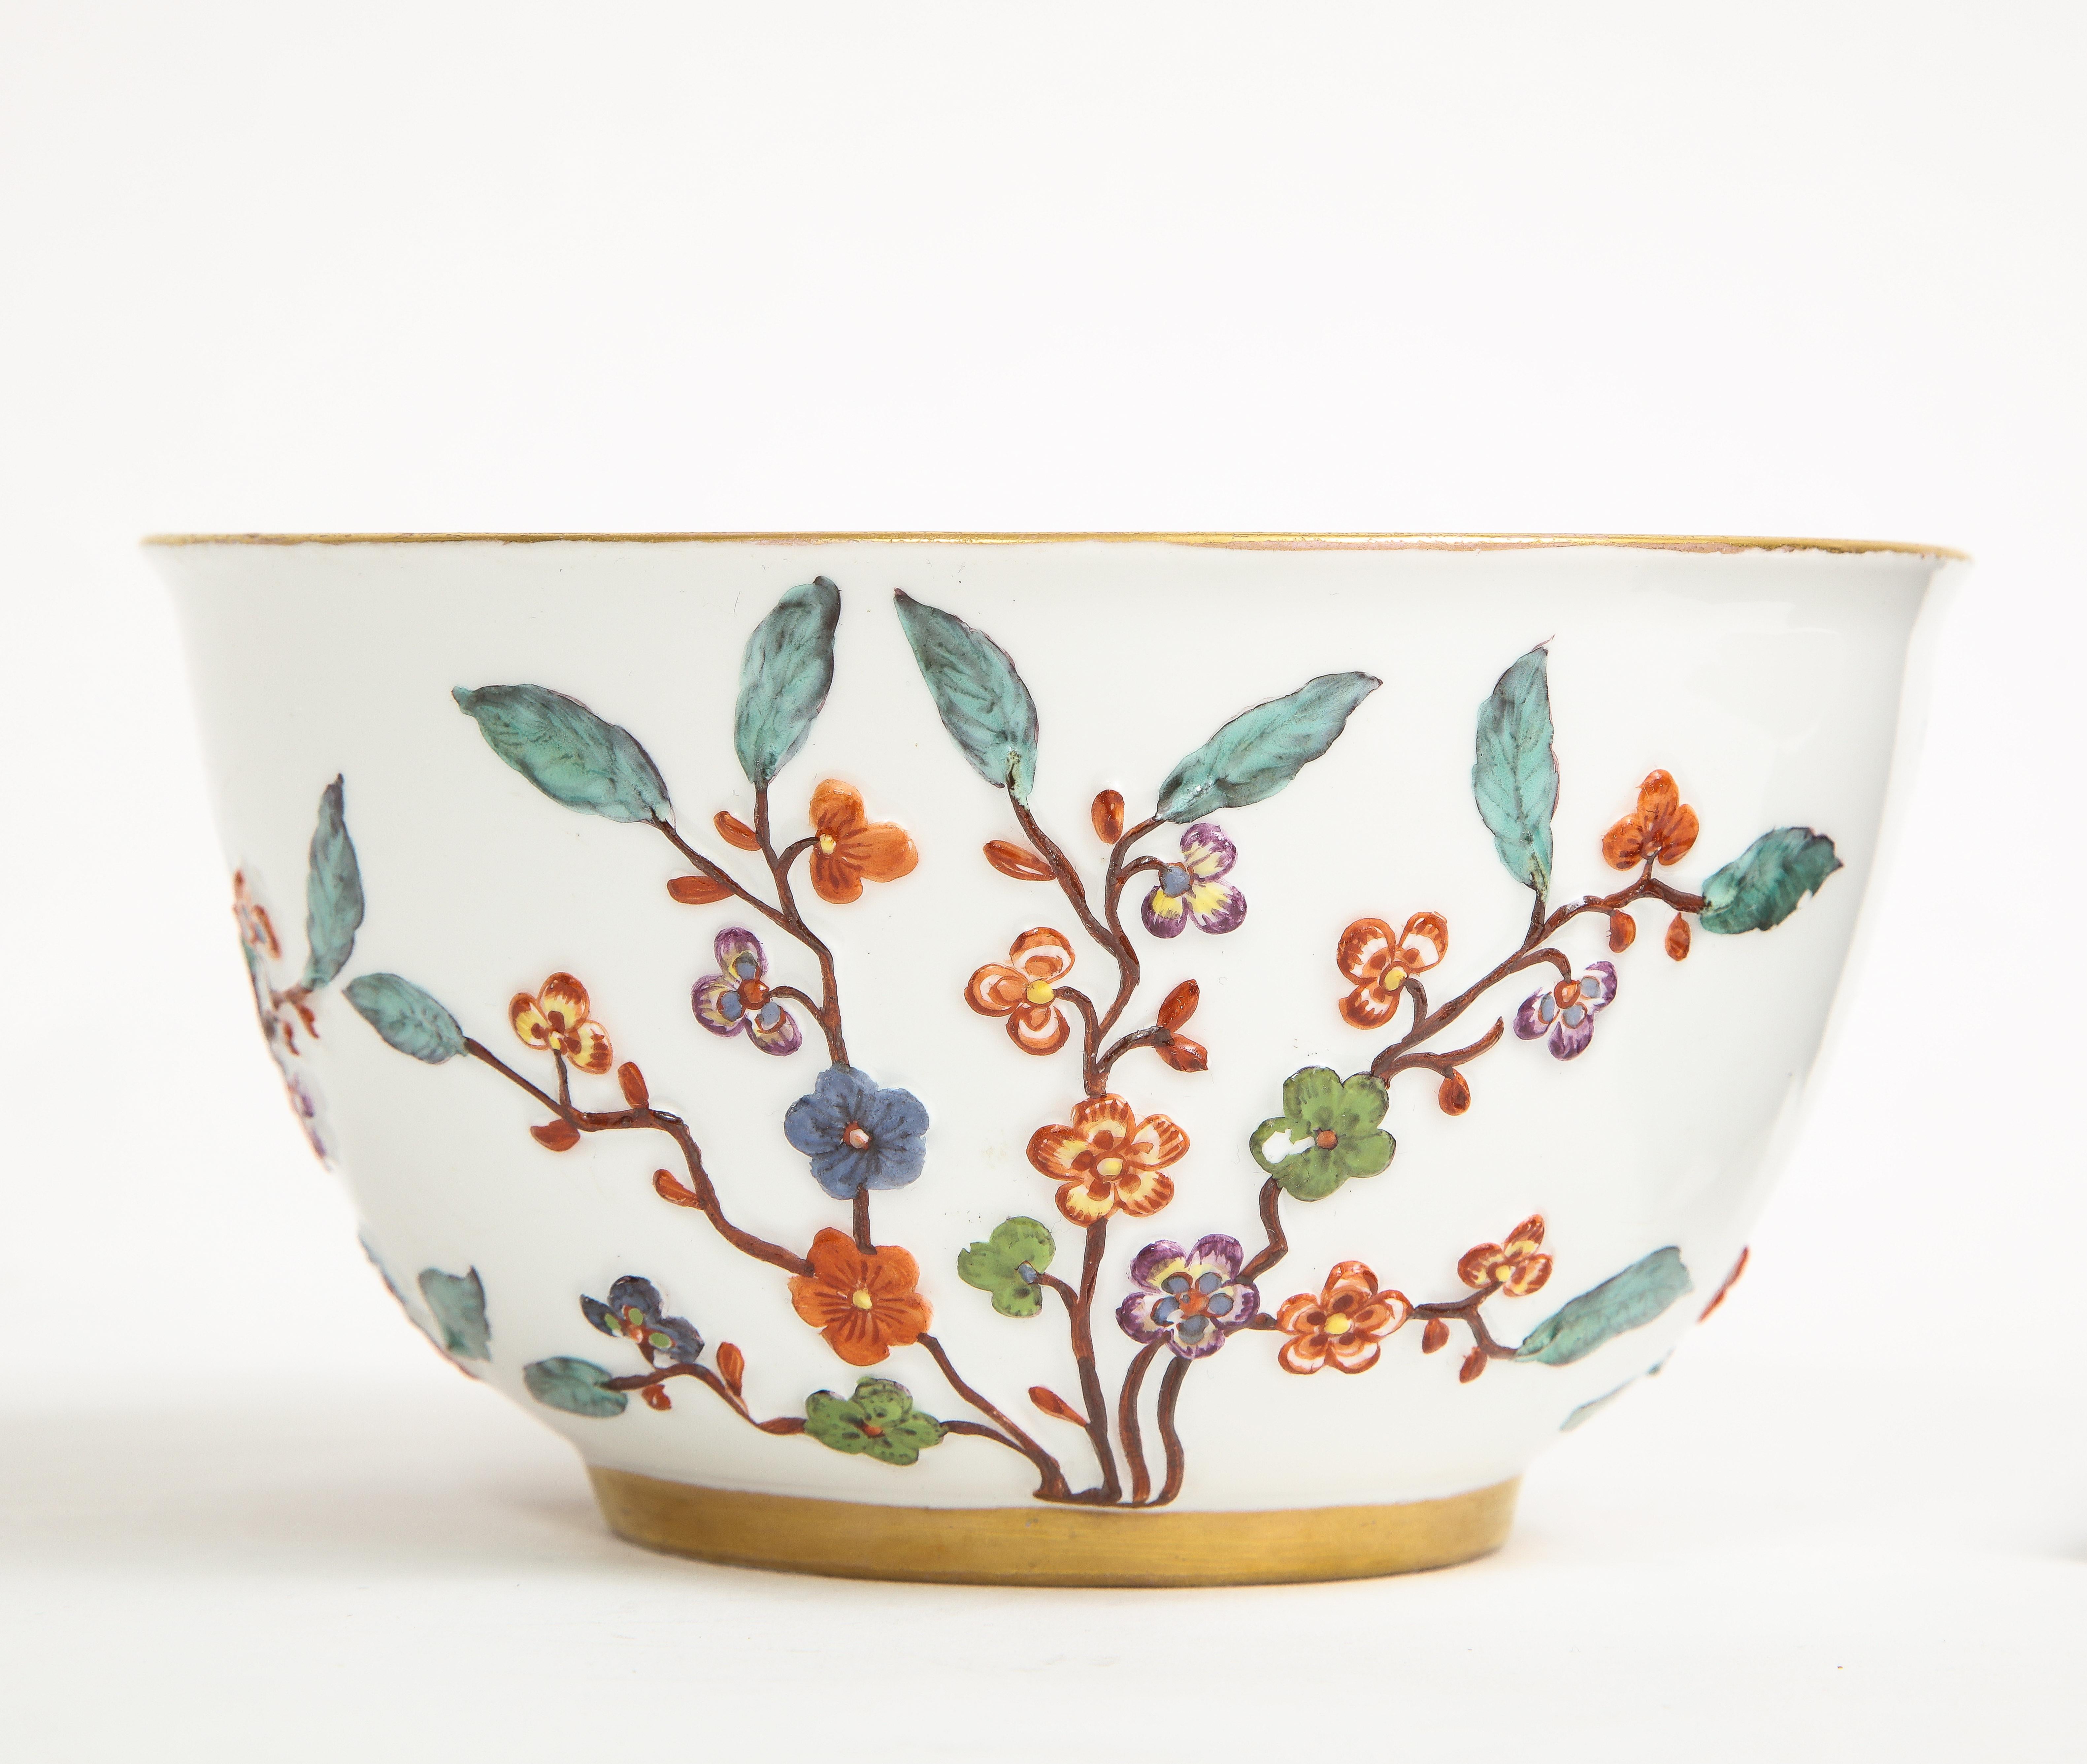 Porcelain 18th C. Meissen Hausmaler Decorated Bowl with High Relief Multi-Colored Flowers For Sale